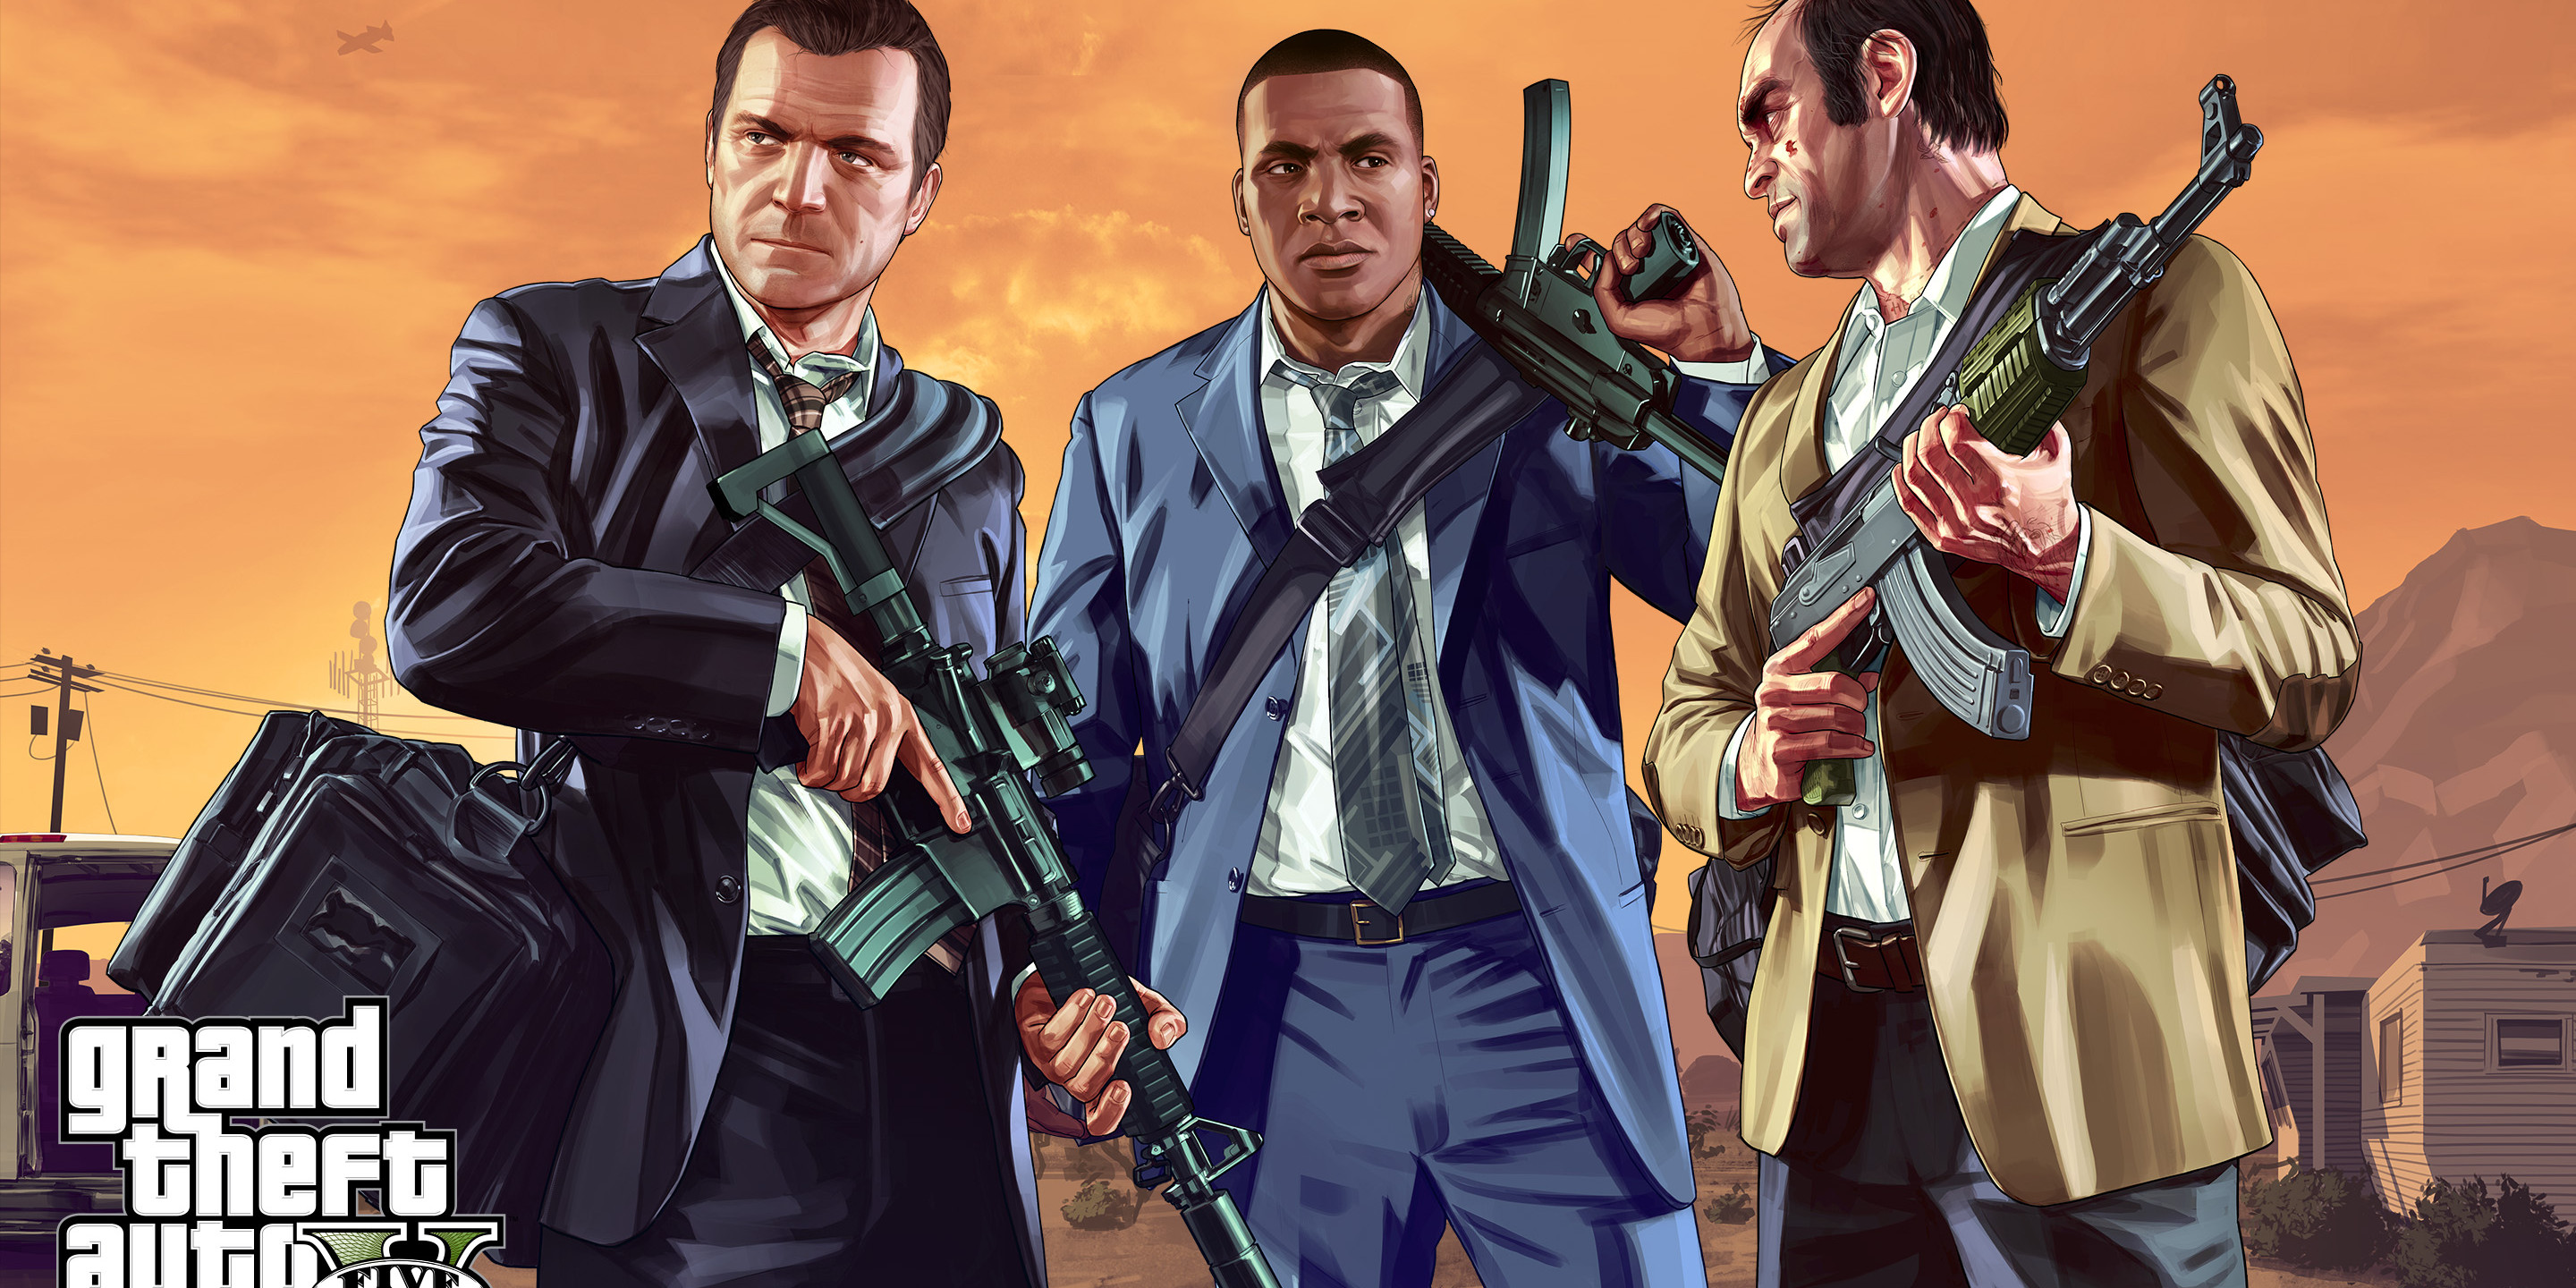 Epic games grand theft. Grand Theft auto ГТА 5. ГТА 5 (Grand Theft auto 5). GTA 5 герои.